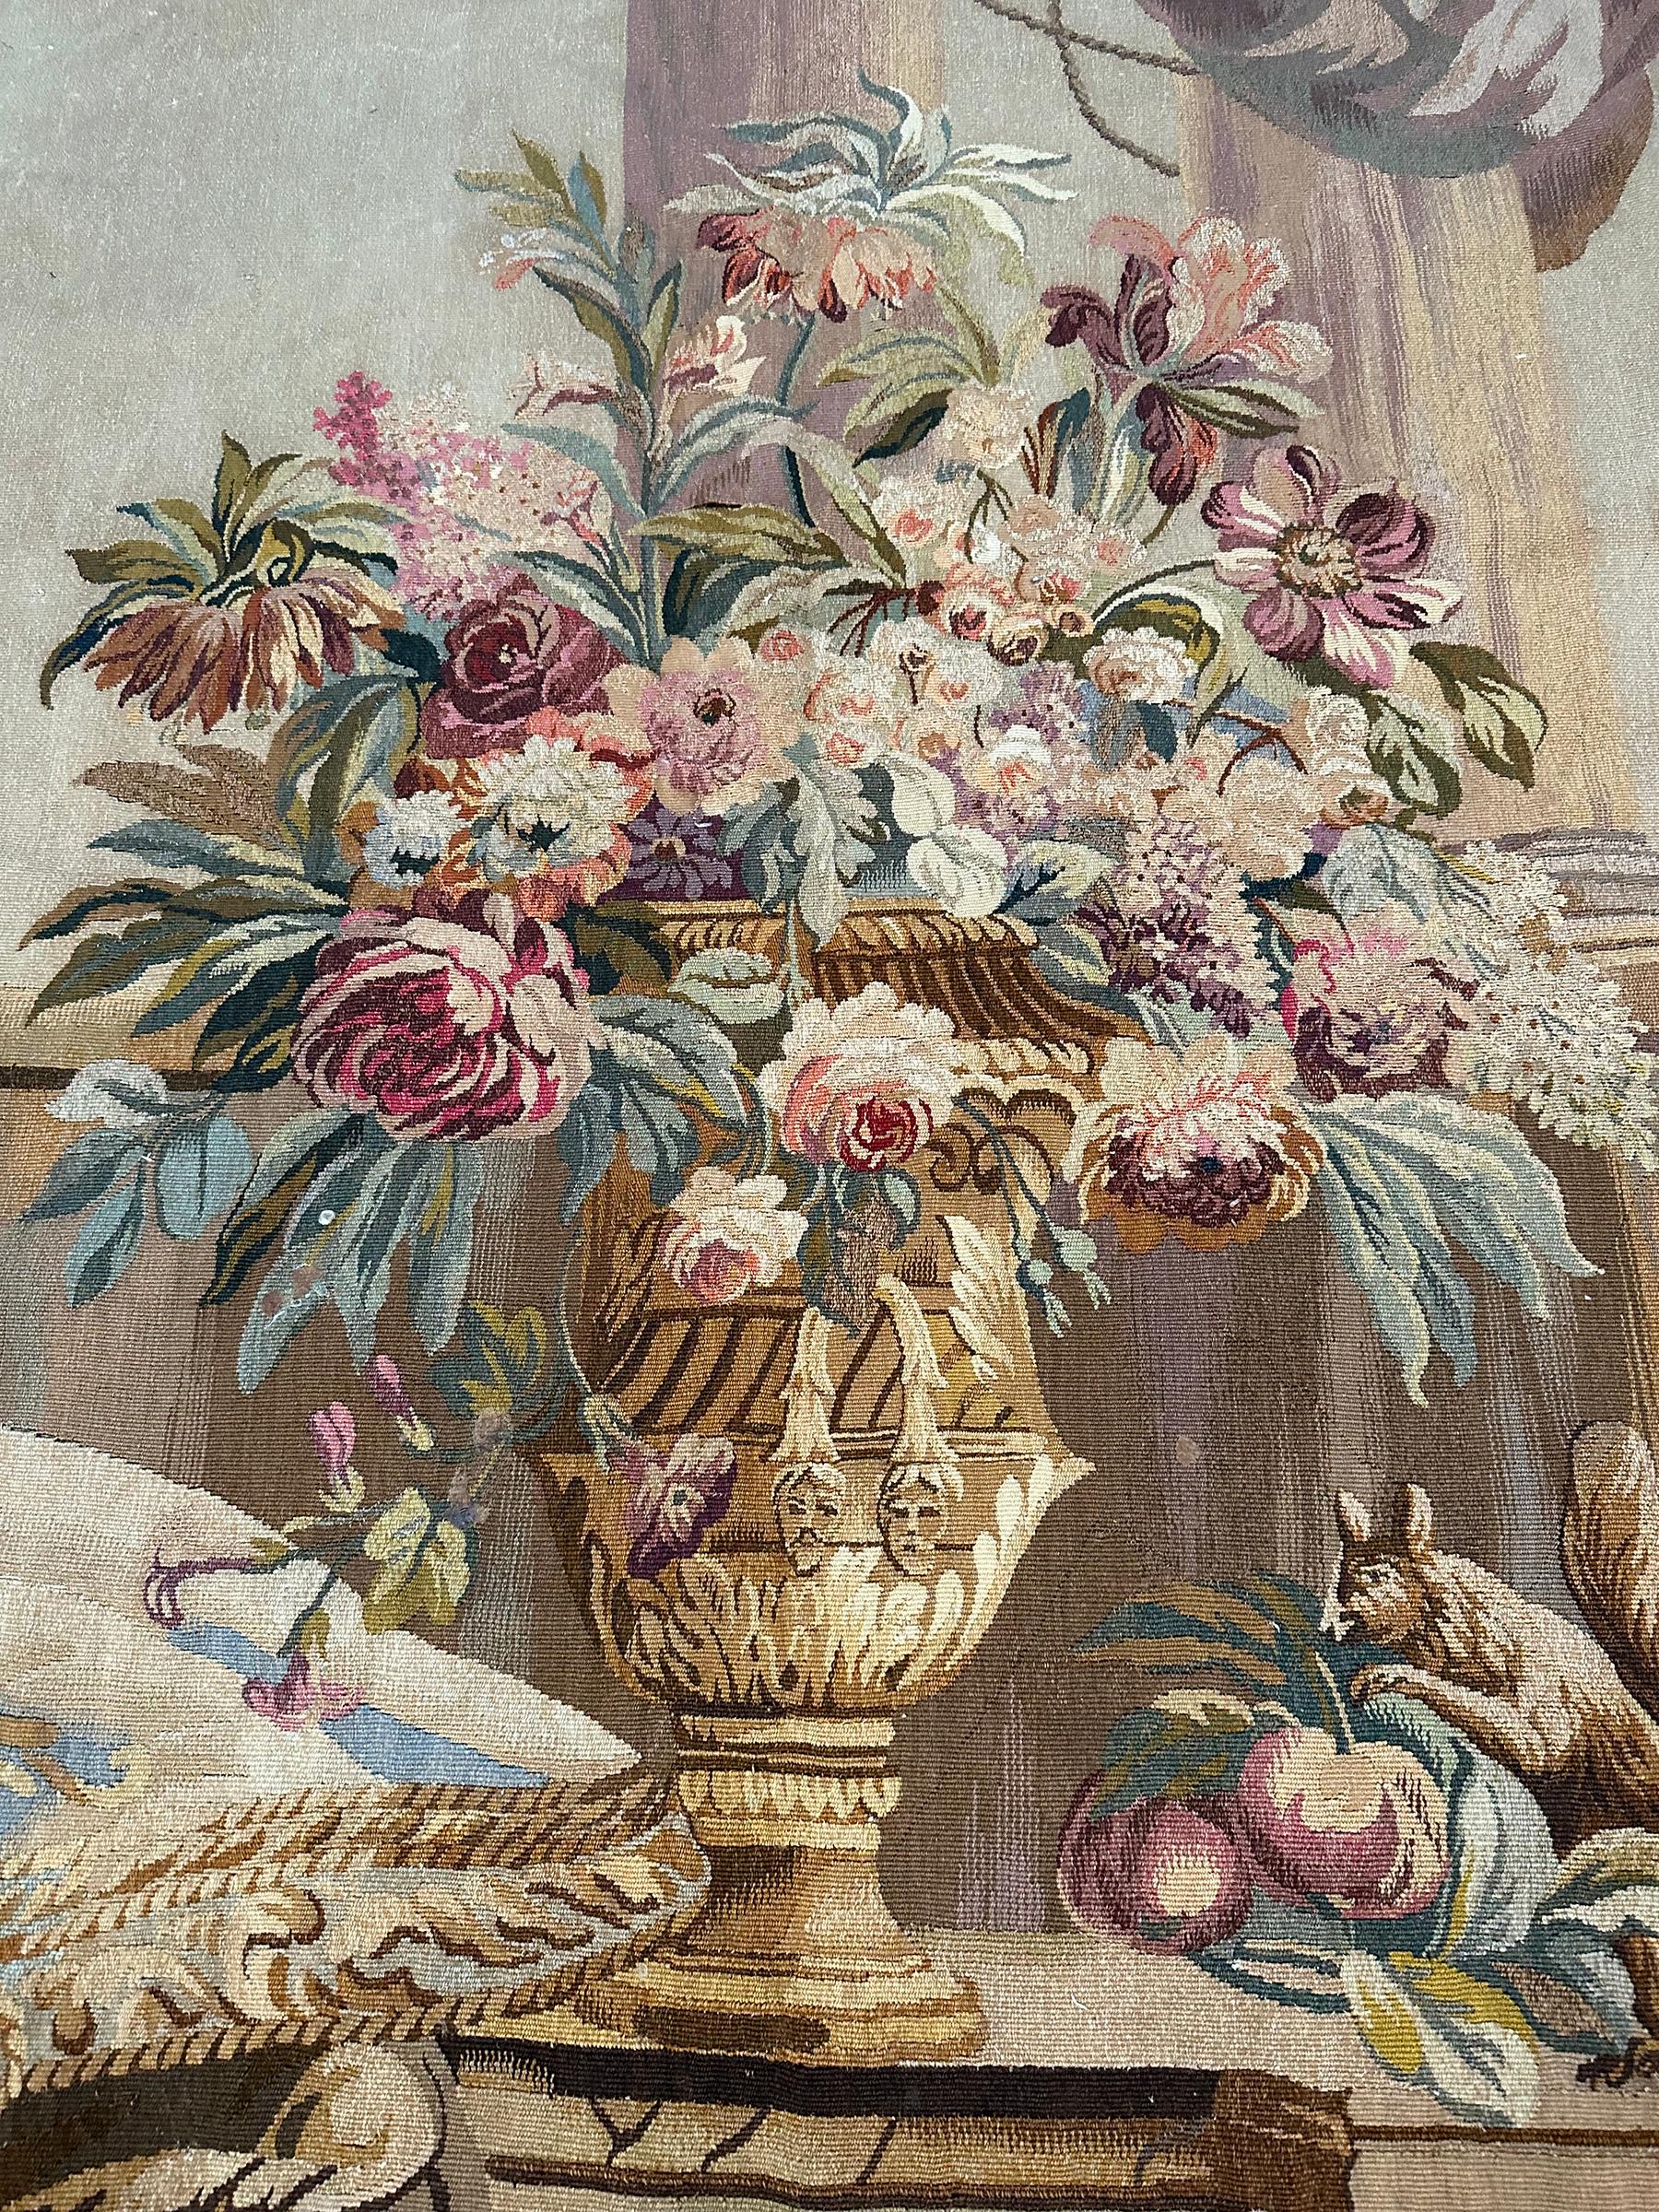 Antique French Tapestry Wool & Silk Masquerade Vase Exotic Flowers 4x5 1920 4' x 4'8